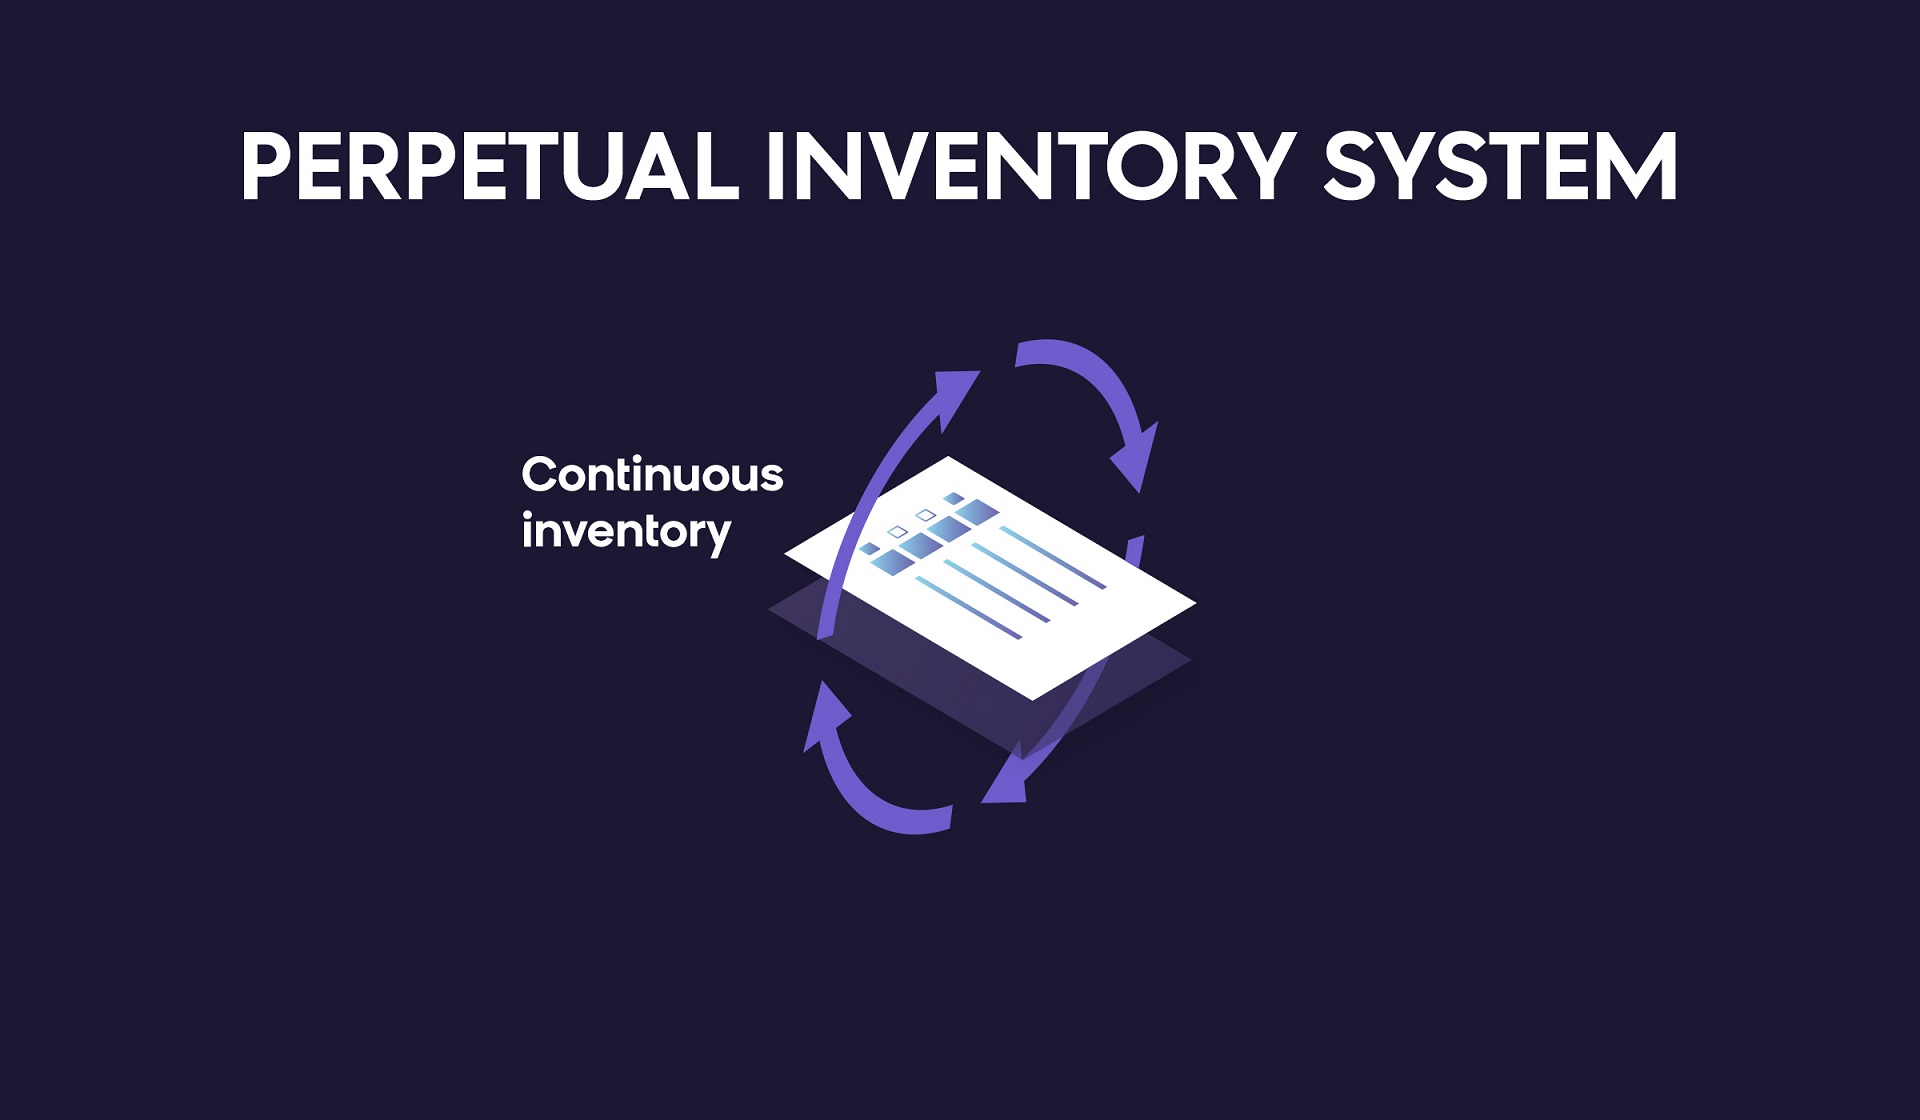 What is a perpetual inventory system?